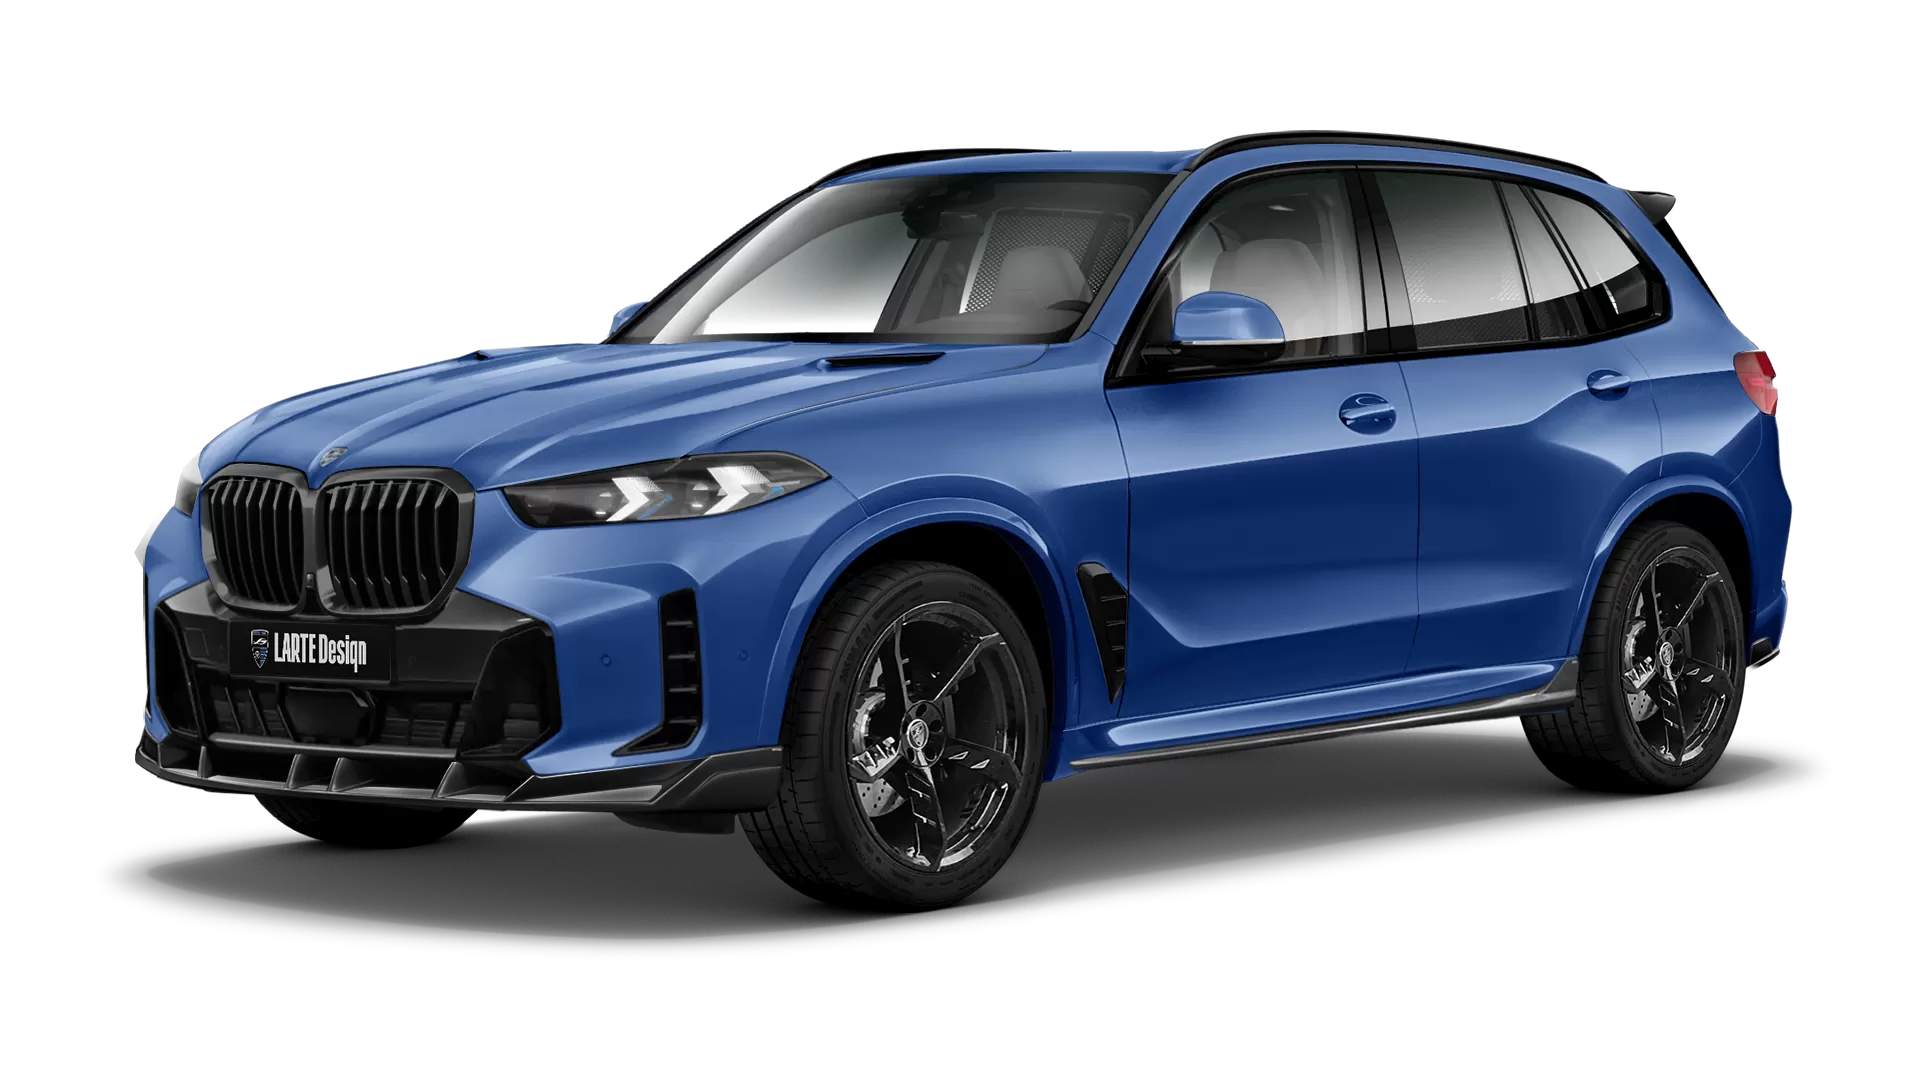 BMW X5 G05 LCI Facelift with painted body kit: front view shown in Marina Bay Blue